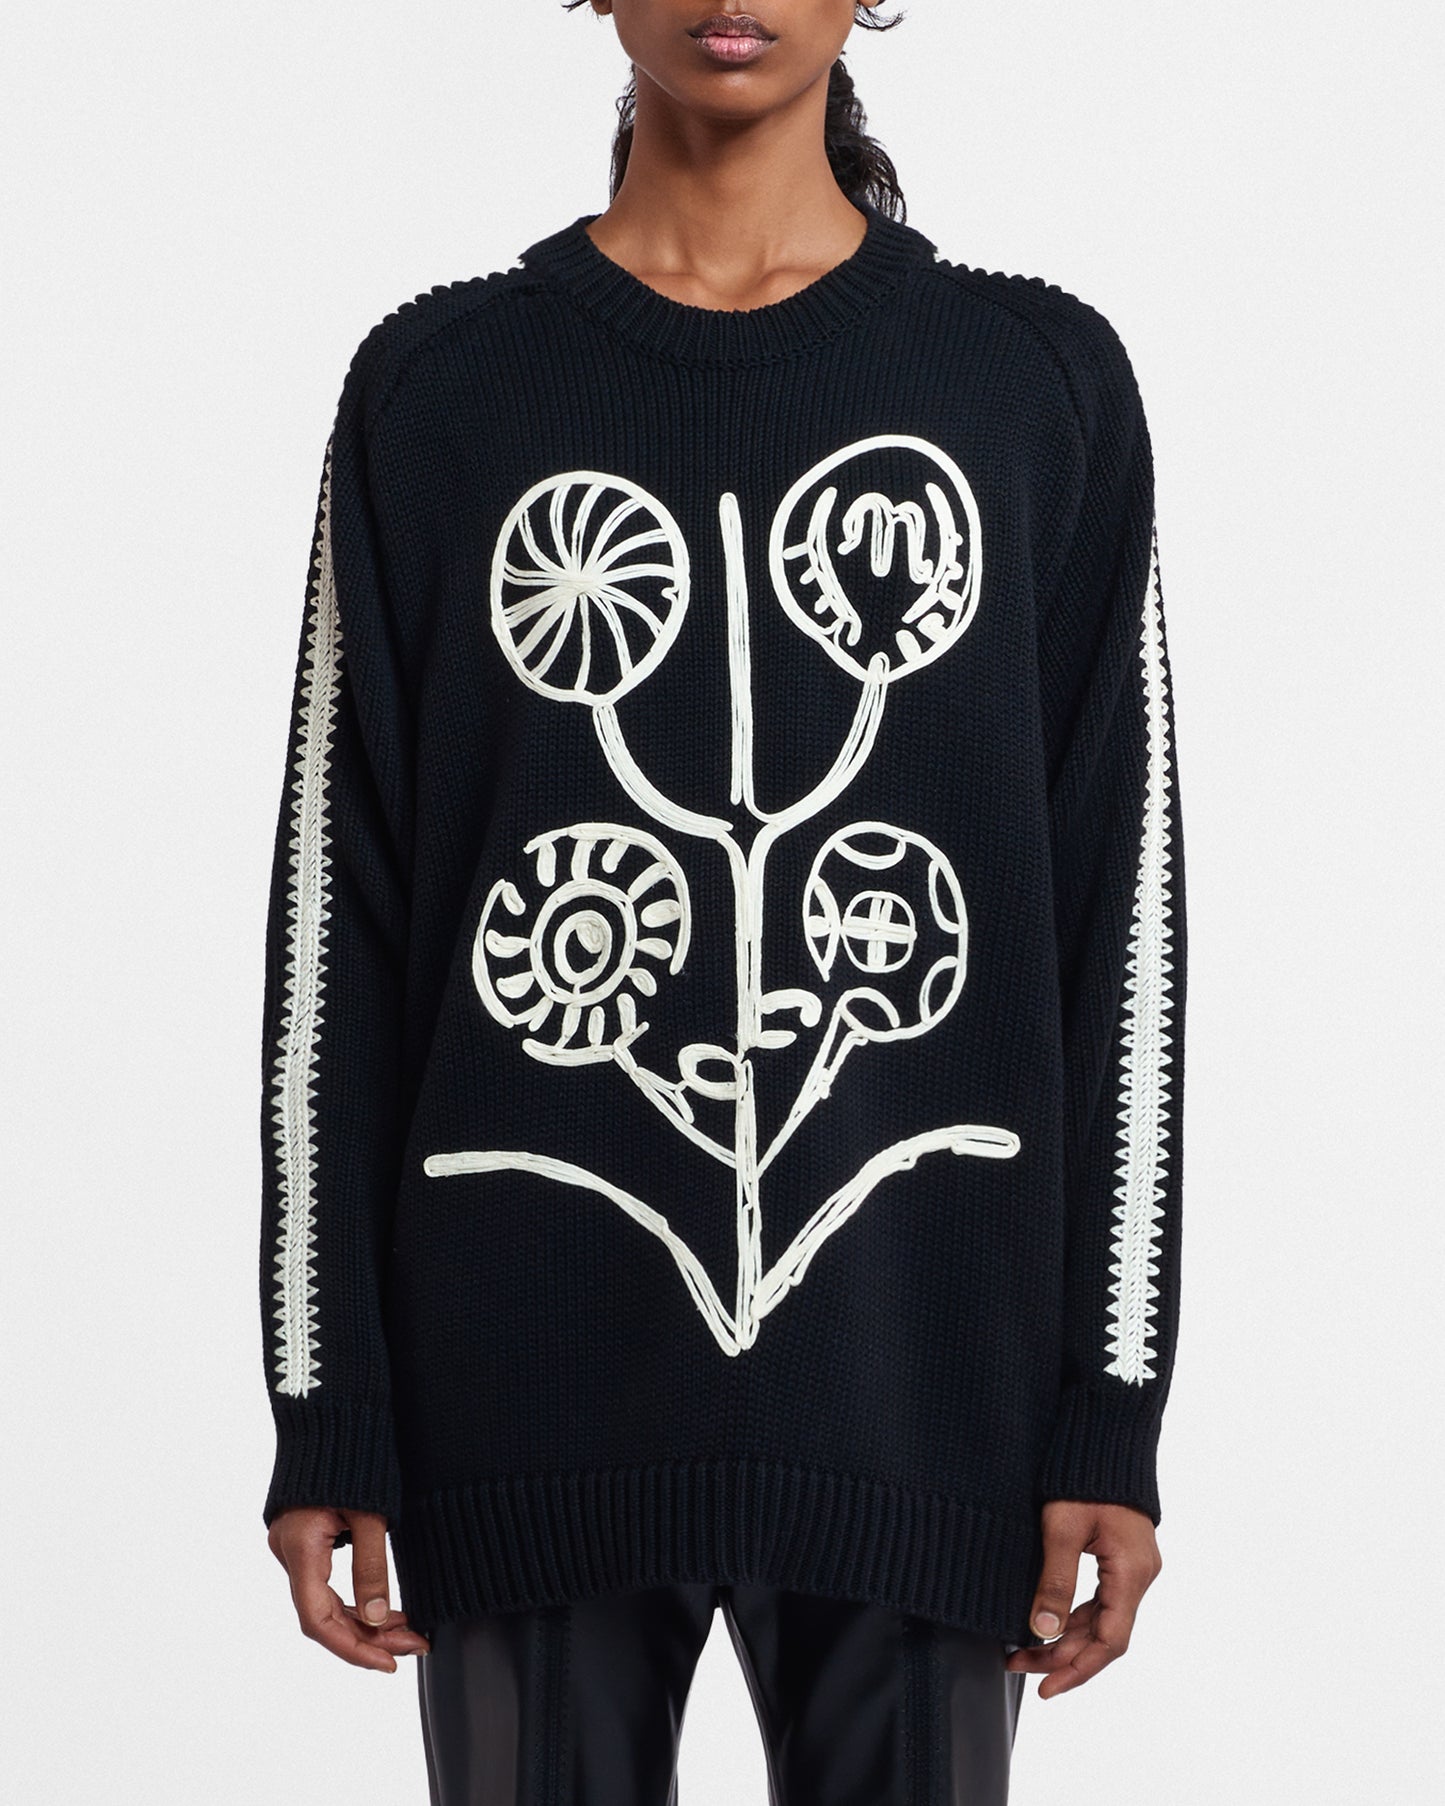 Busra - Embroidered Cotton Sweater - Black